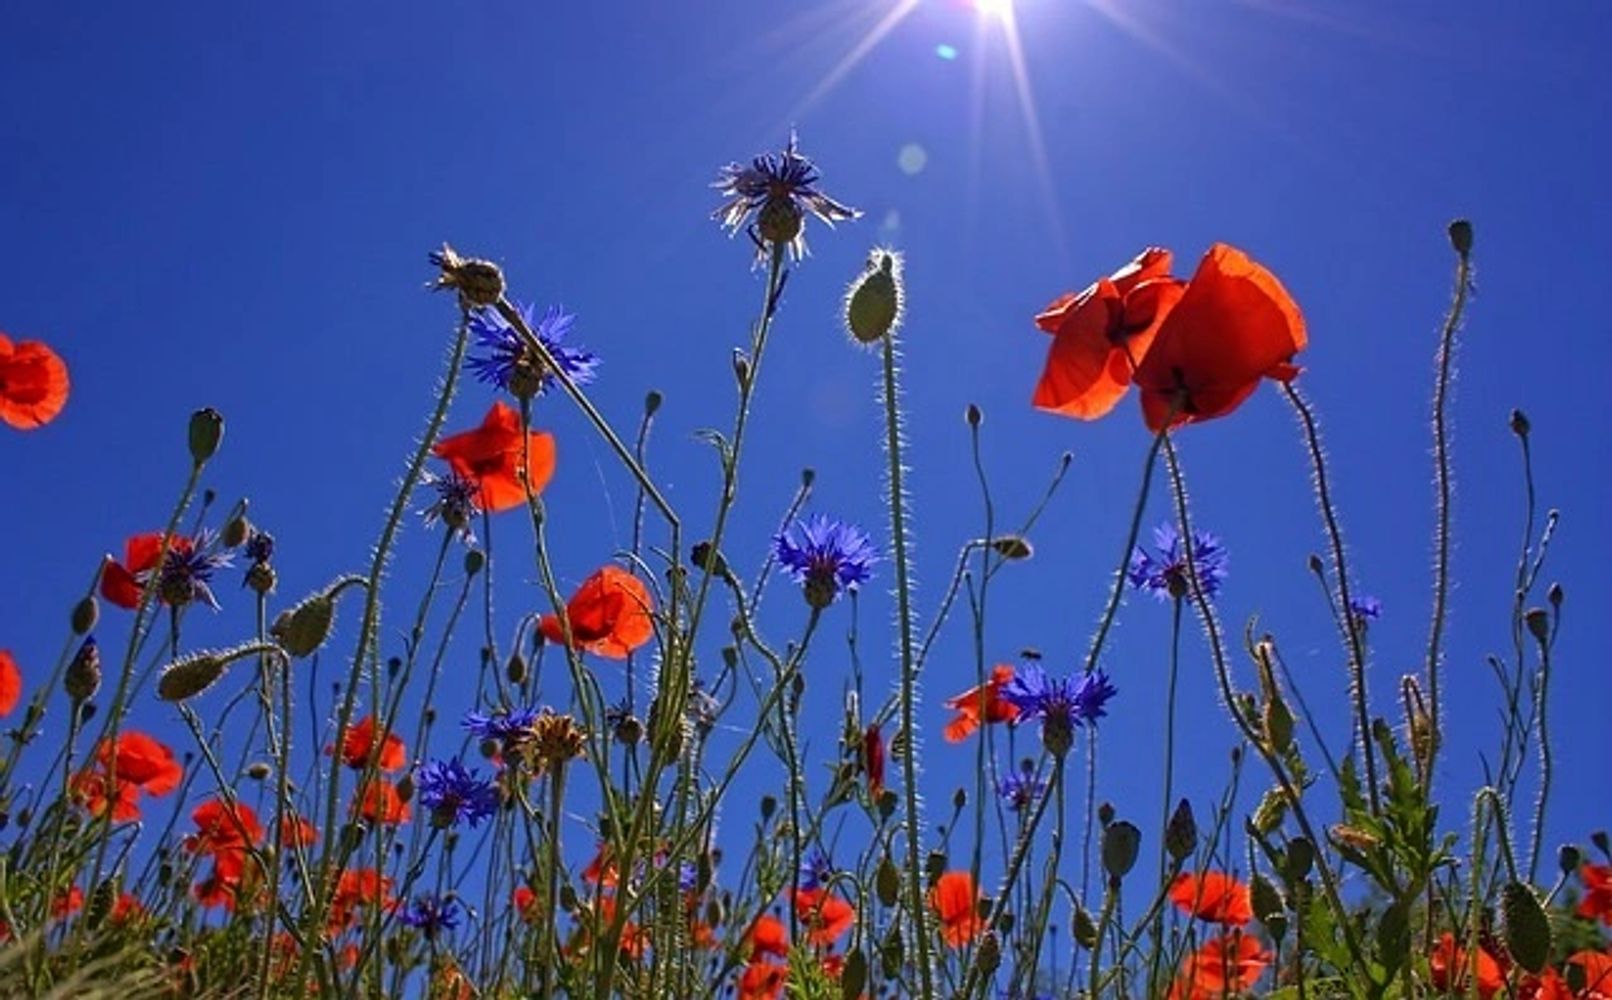 Blue Sky and Poppies ~ Image by Peter Dargatz (Pixabay)
